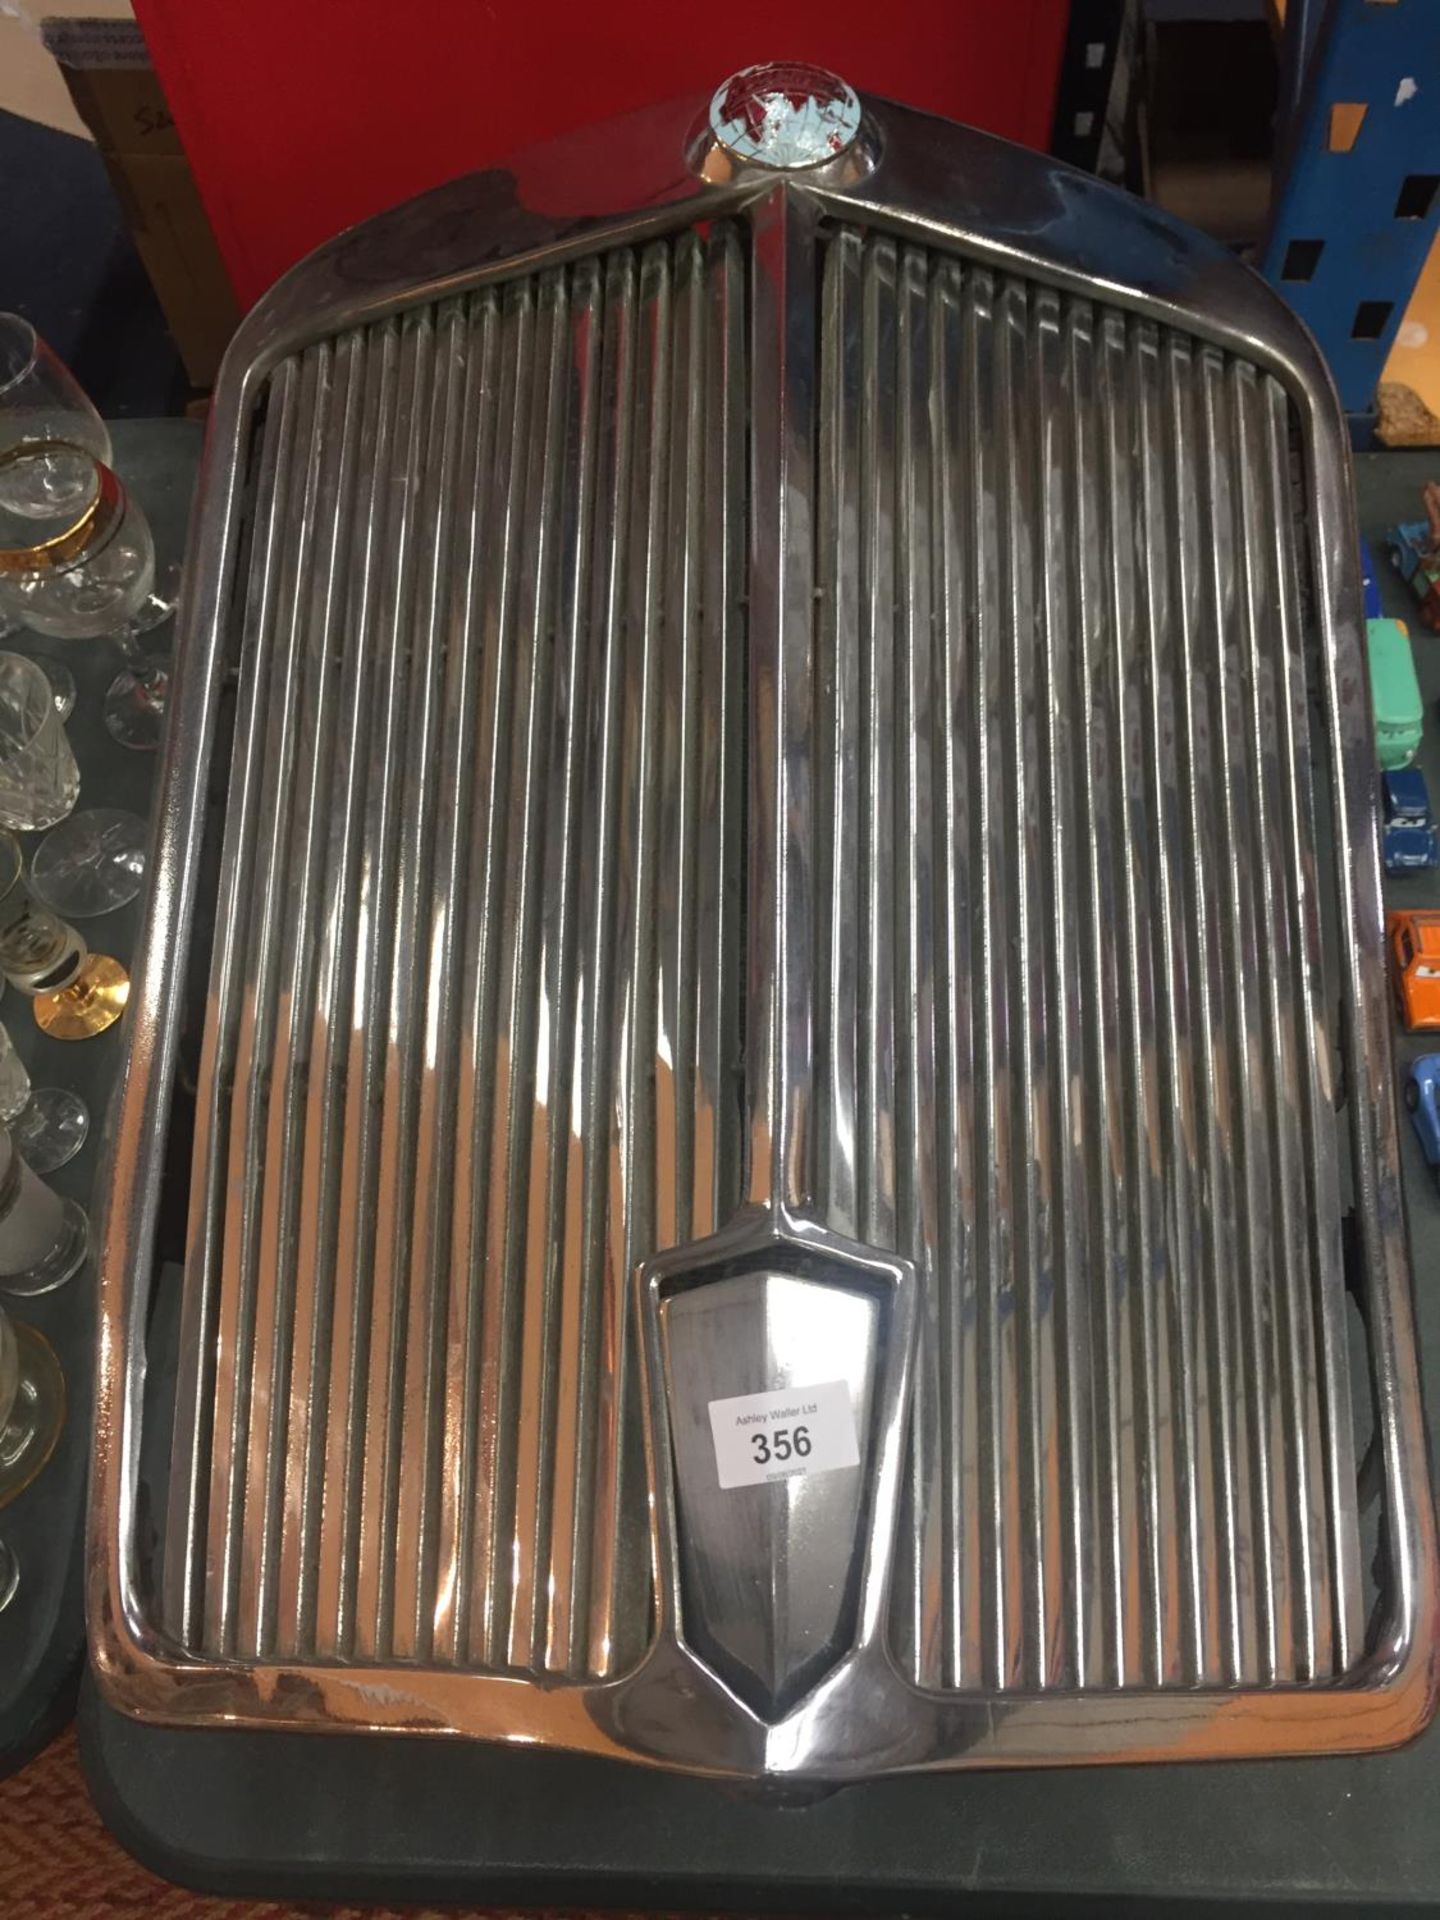 A VINTAGE TRIUMPH ROADSTER APPROXIMATELY 1949 RADIATOR AND GRILL